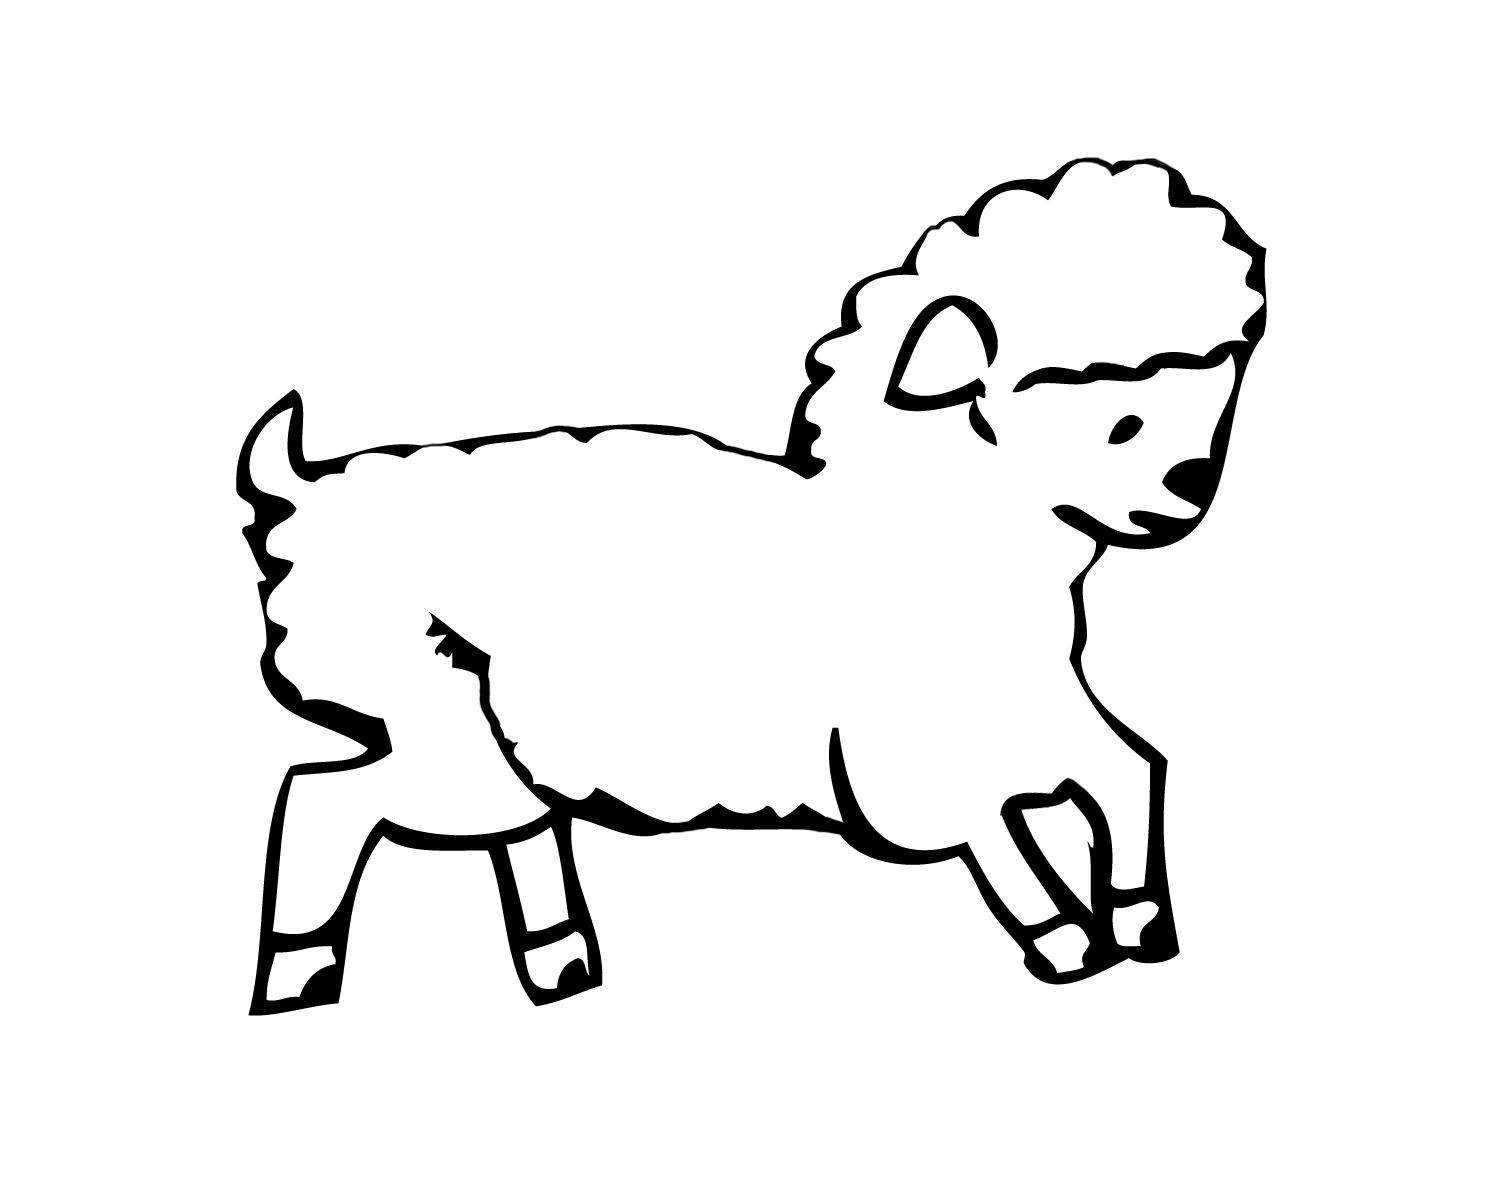 Best Photos of Sheep Outline Template - Sheep Template, Lamb Sheep ...